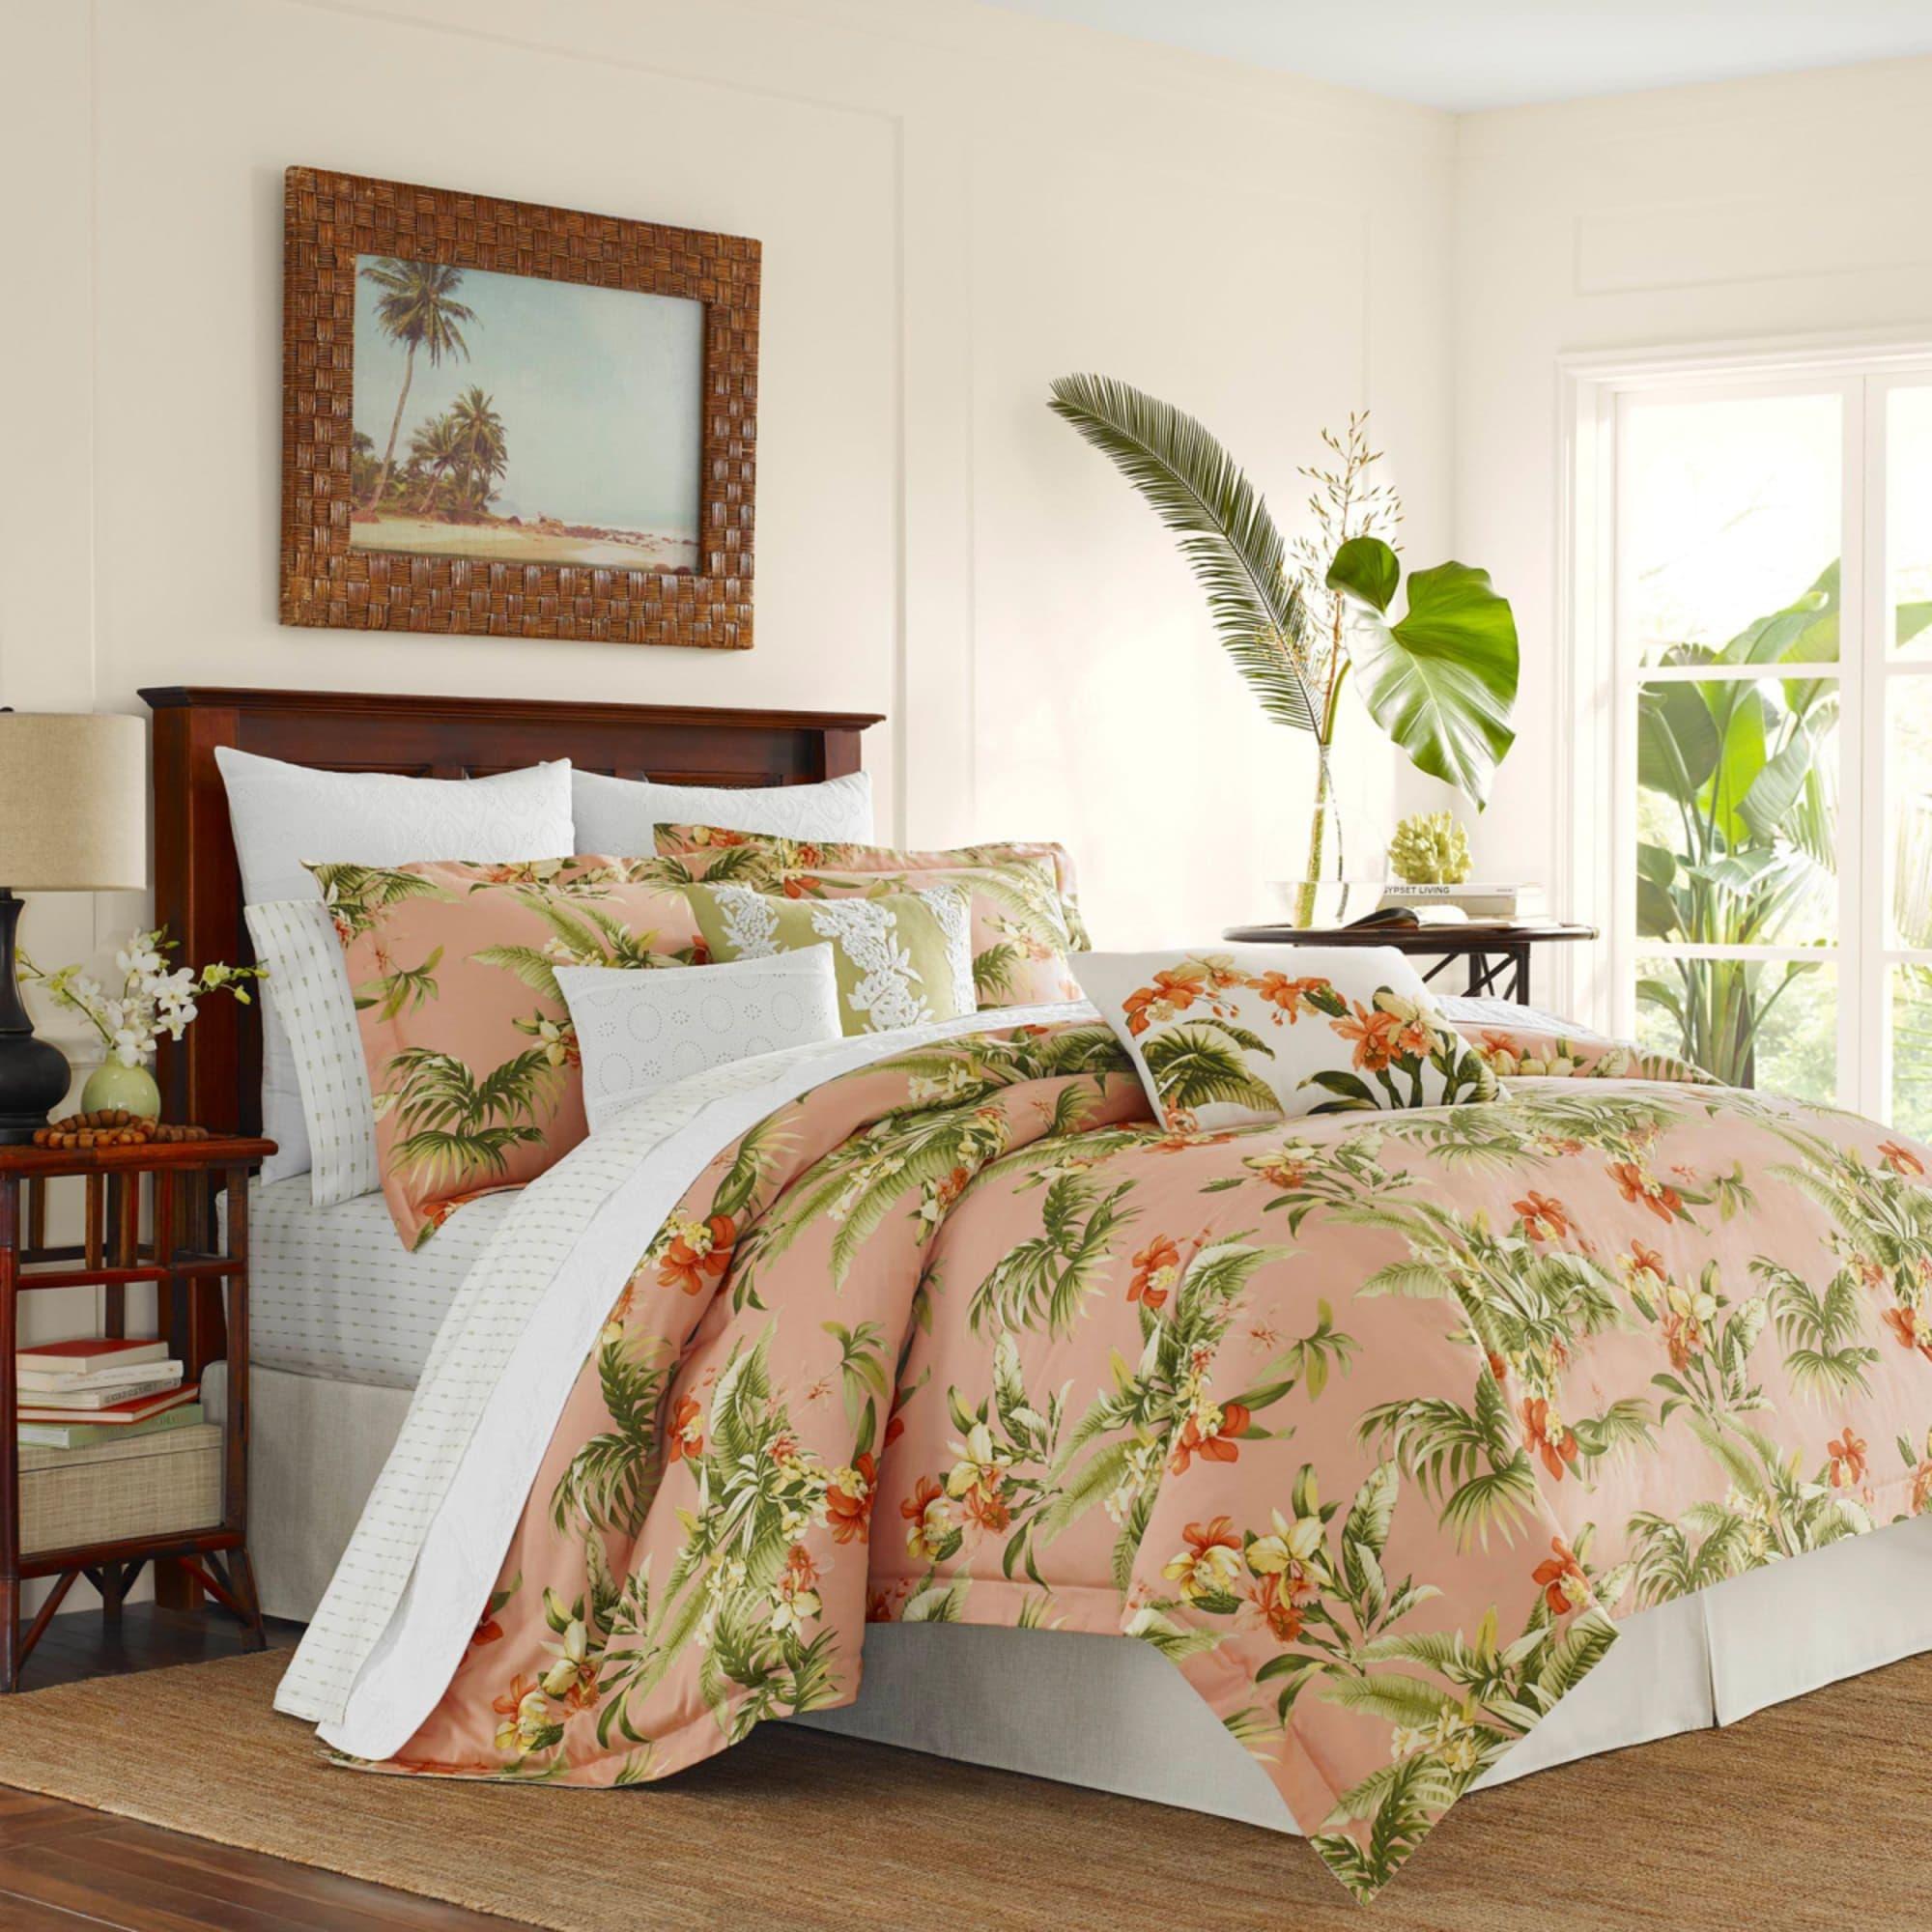 Tommy Bahama Siesta Key Quilt Cover Set Queen Image 3